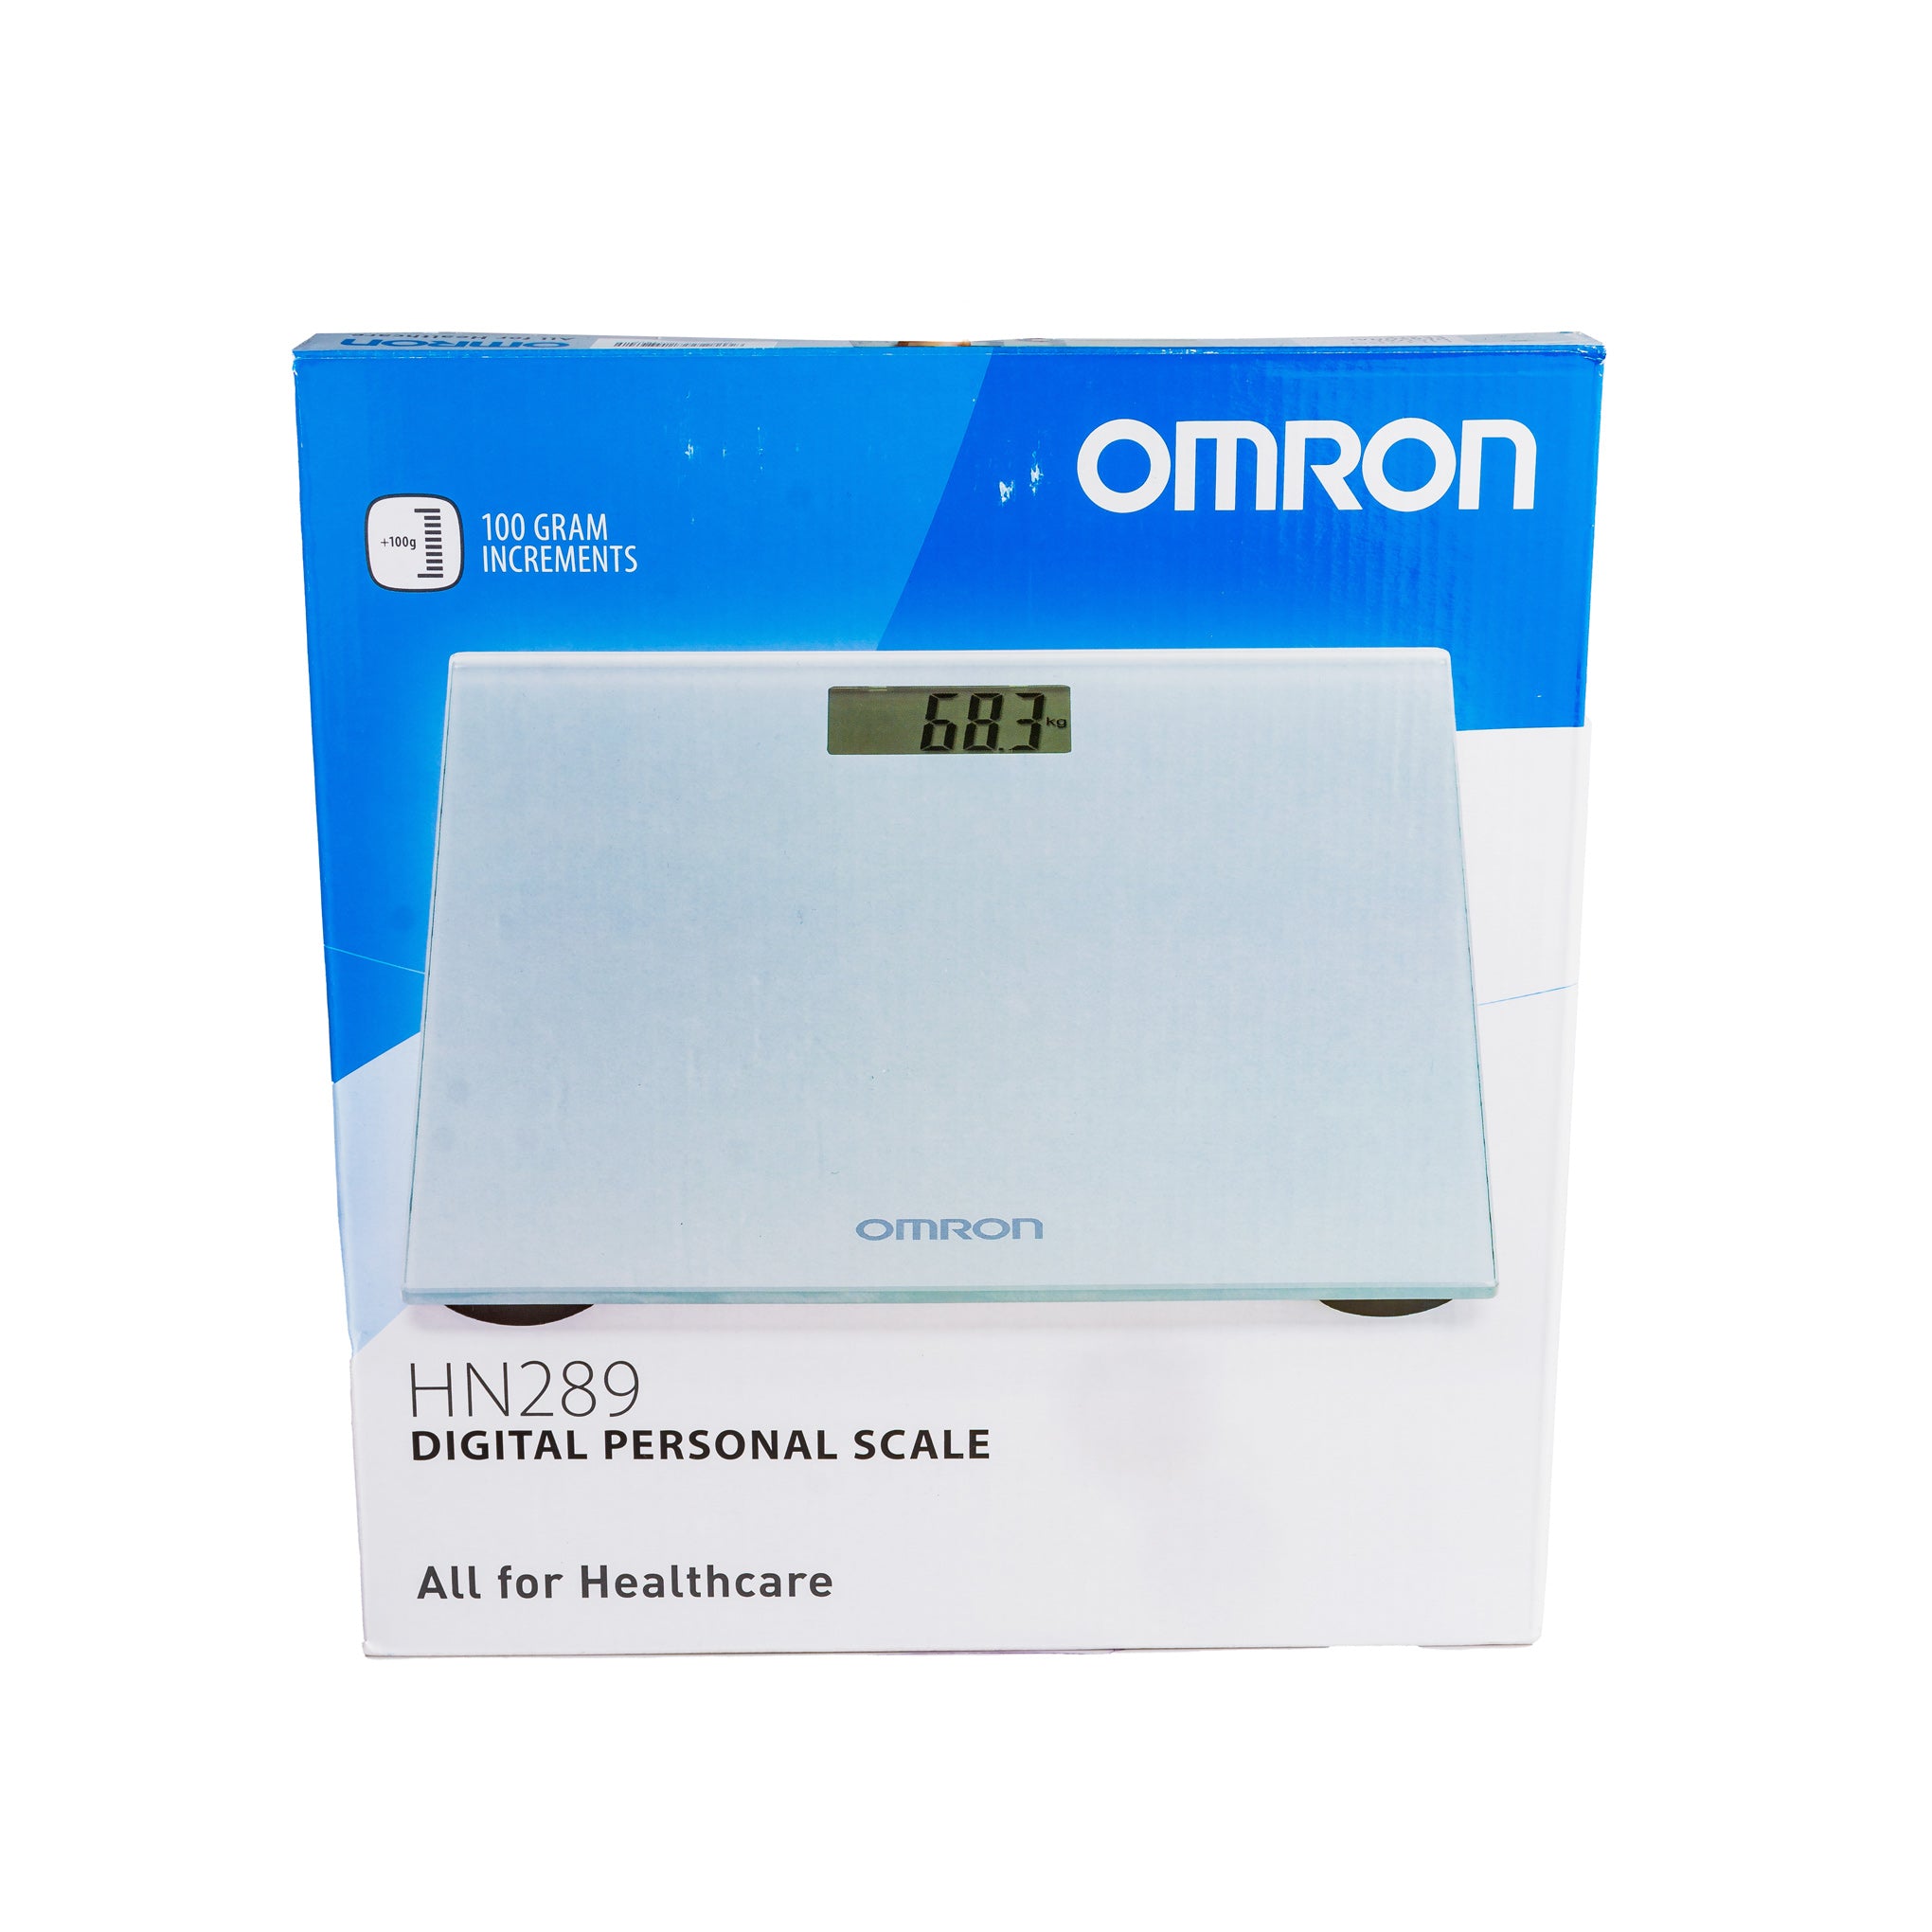 https://cdn.shopify.com/s/files/1/0562/3853/8907/products/omron-personal-digital-scale-hn289-1_bic6aw.jpg?v=1690885023&width=2040